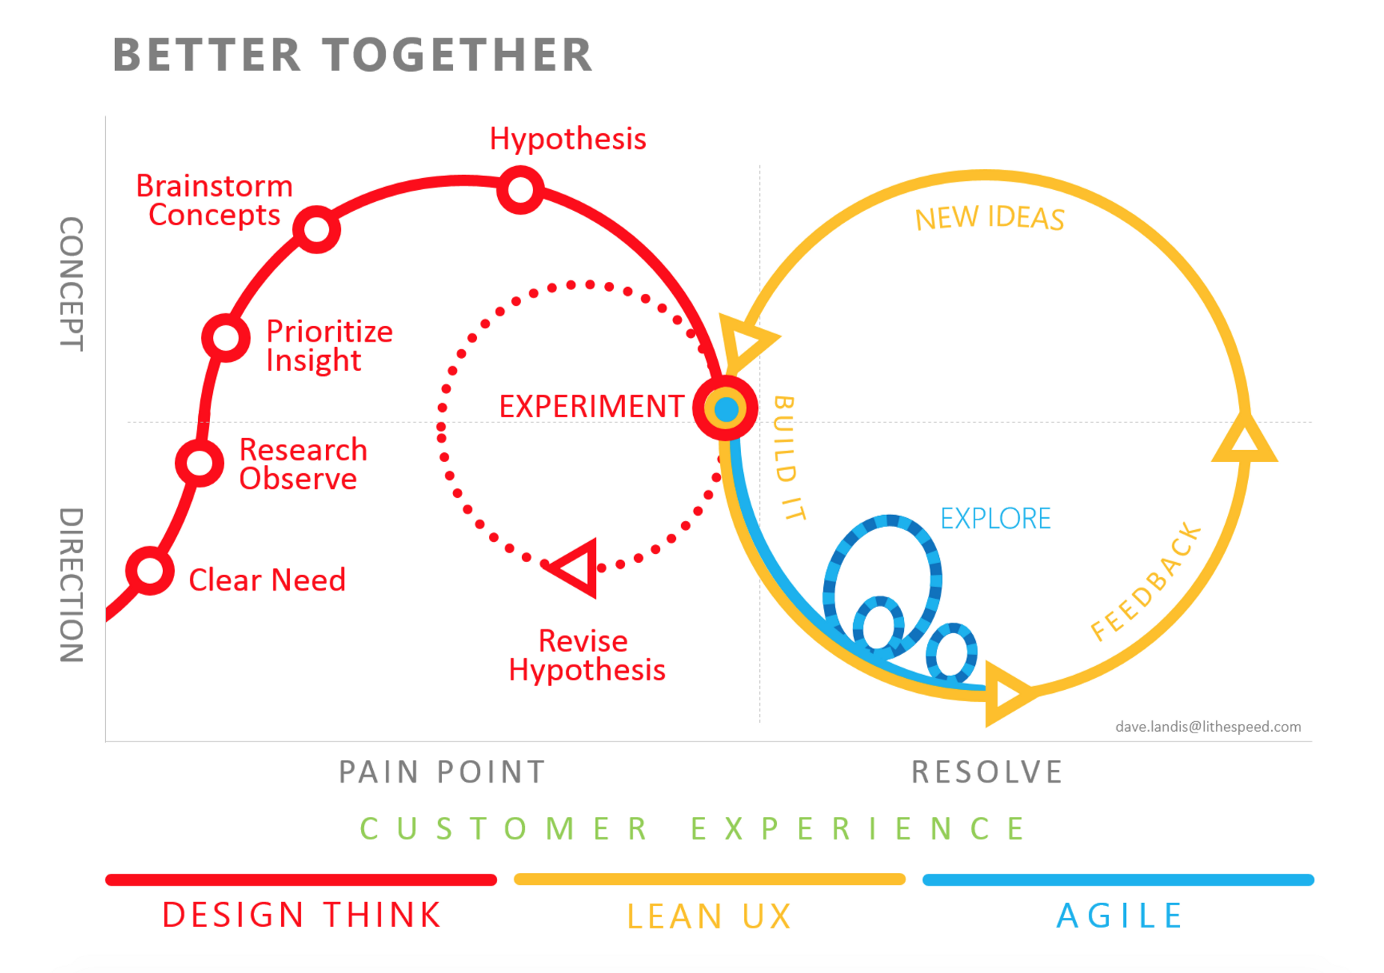 combined Agile, Lean UX and Design Thinking